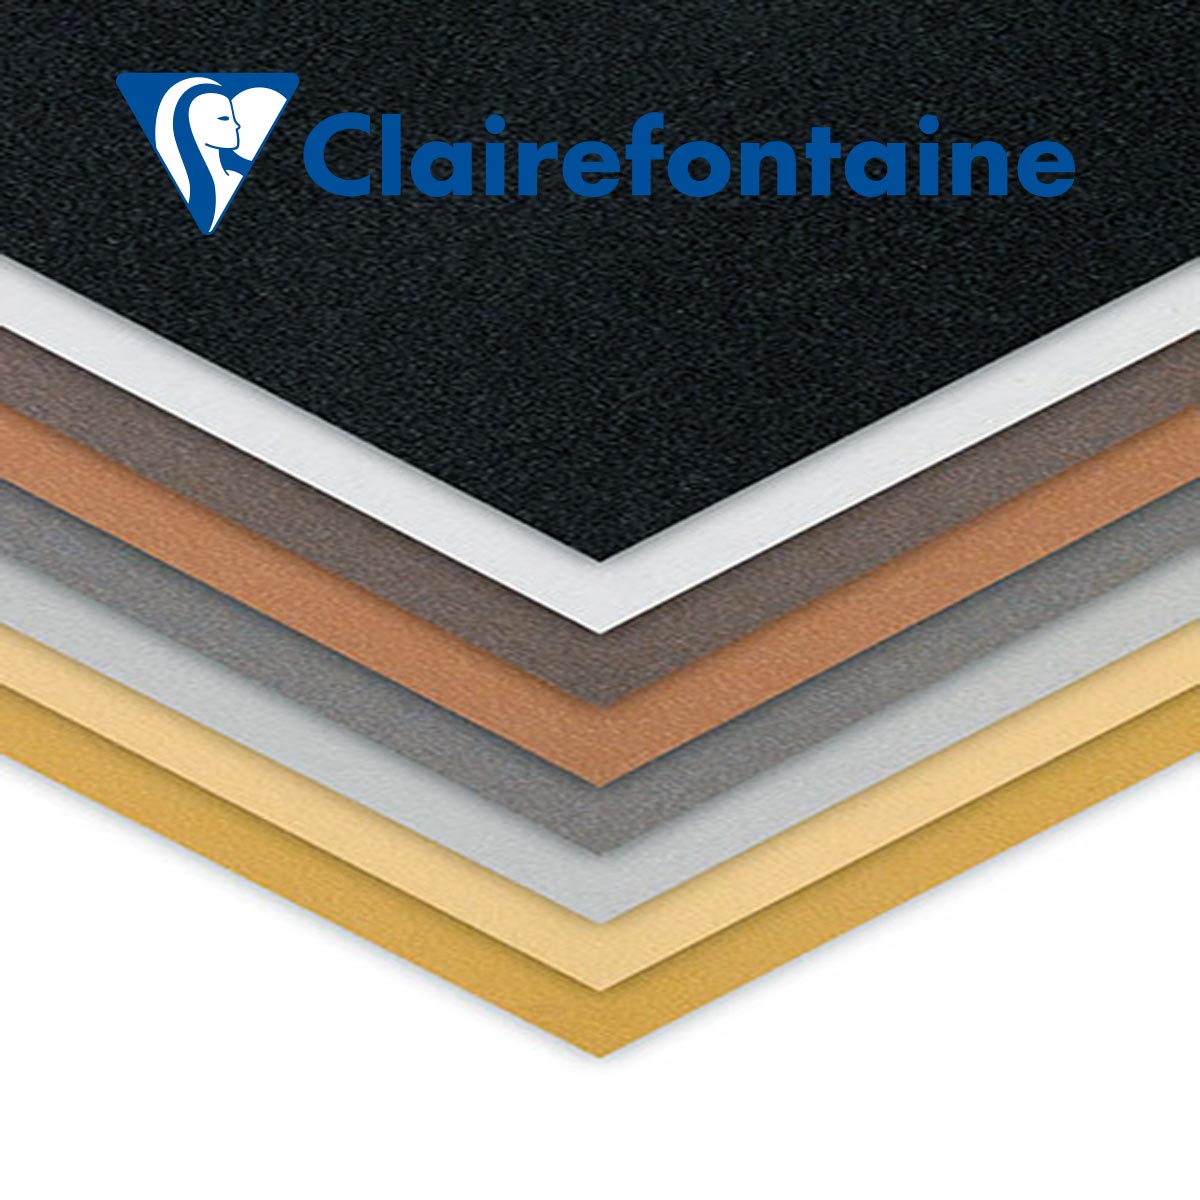 Clairefontaine Pastelmat Standard Sheets 19.5 x 27.5 in (50x70cm)